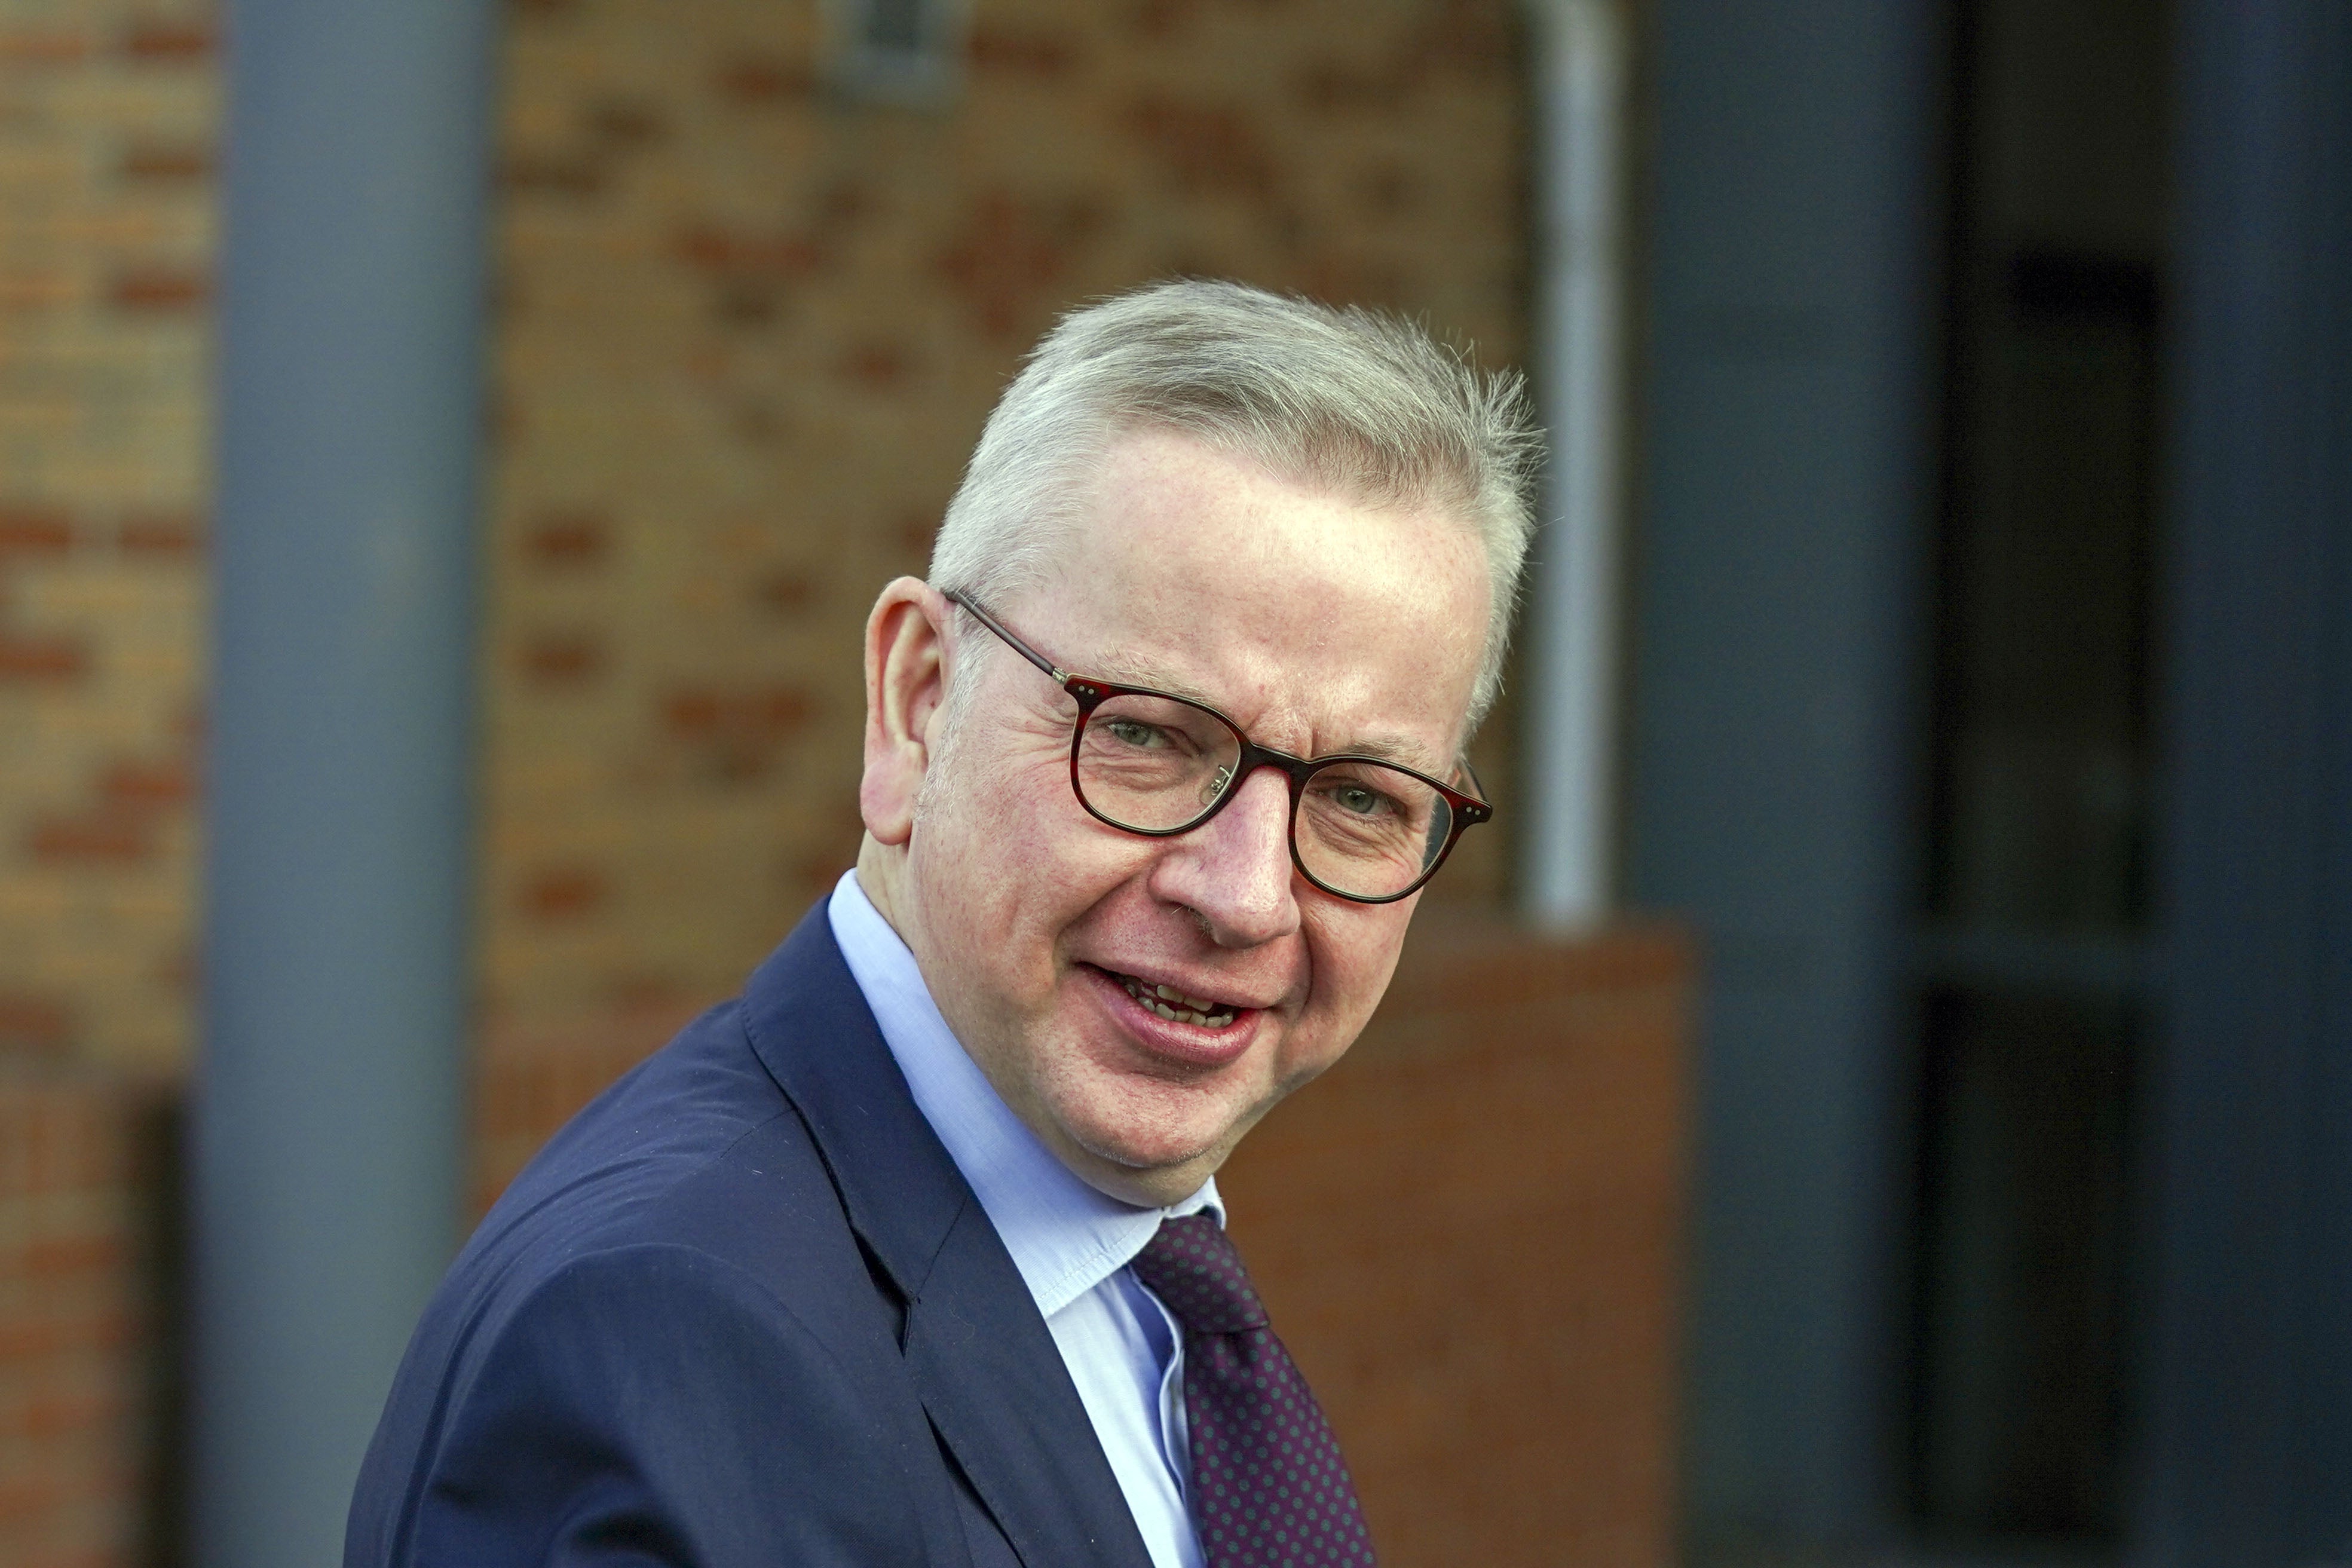 Michael Gove is expected to set out his ‘levelling up’ plans (Steve Parsons/PA)